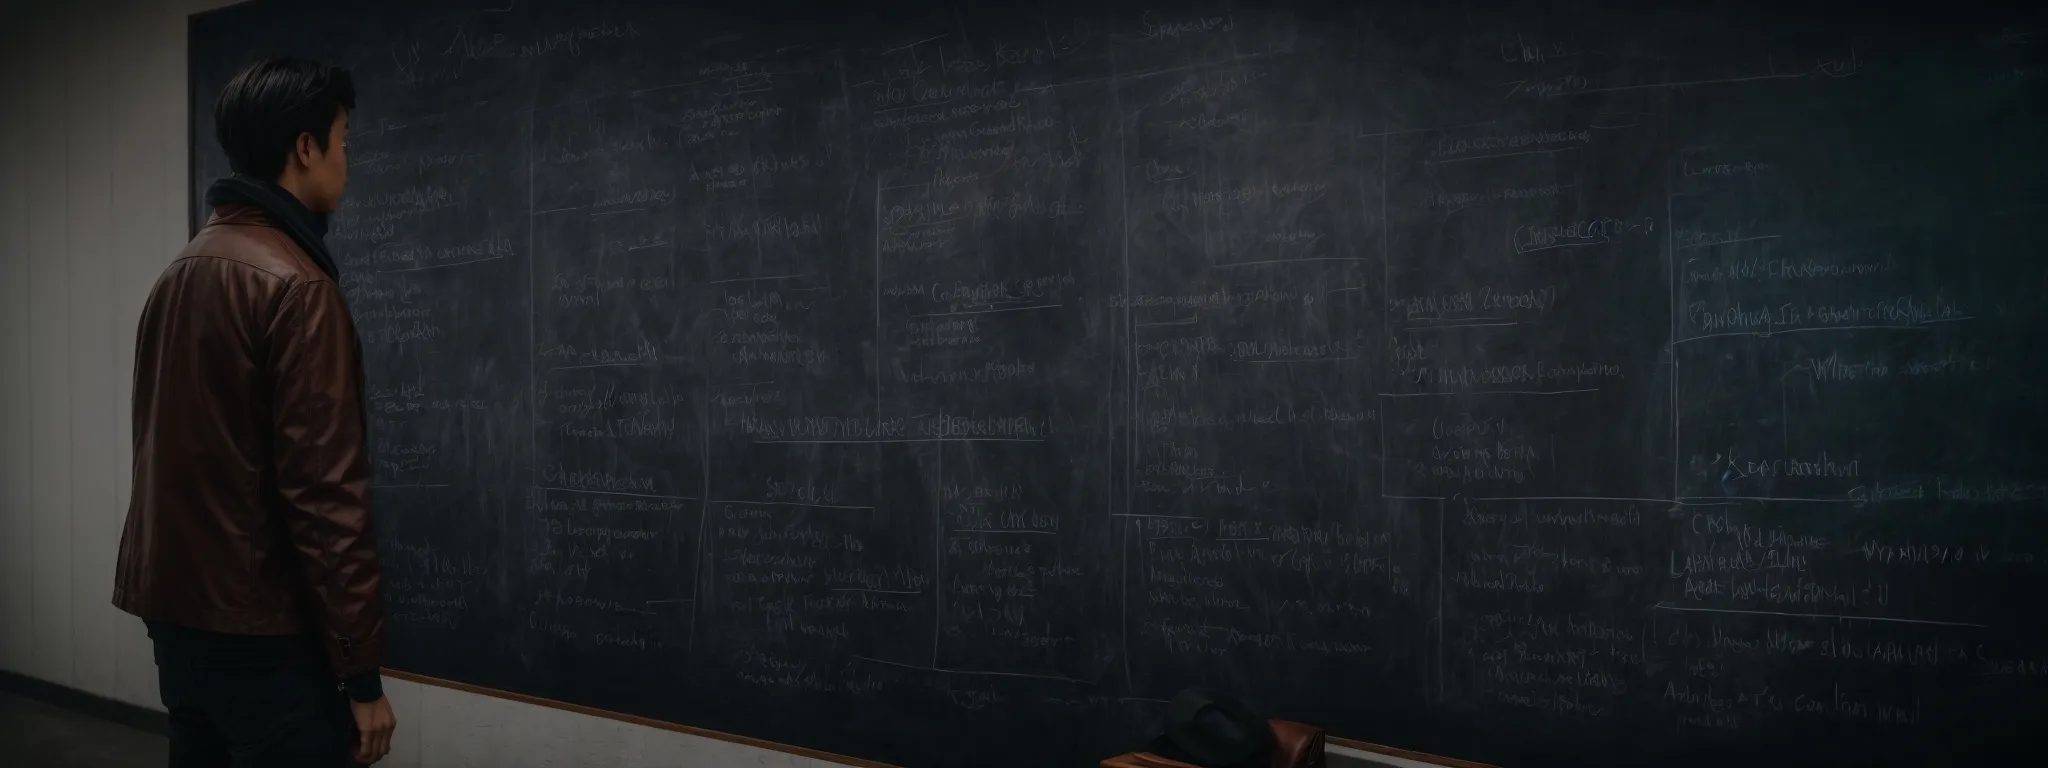 a person standing before a large chalkboard filled with seo-related terms and topic clusters, indicative of strategic planning.